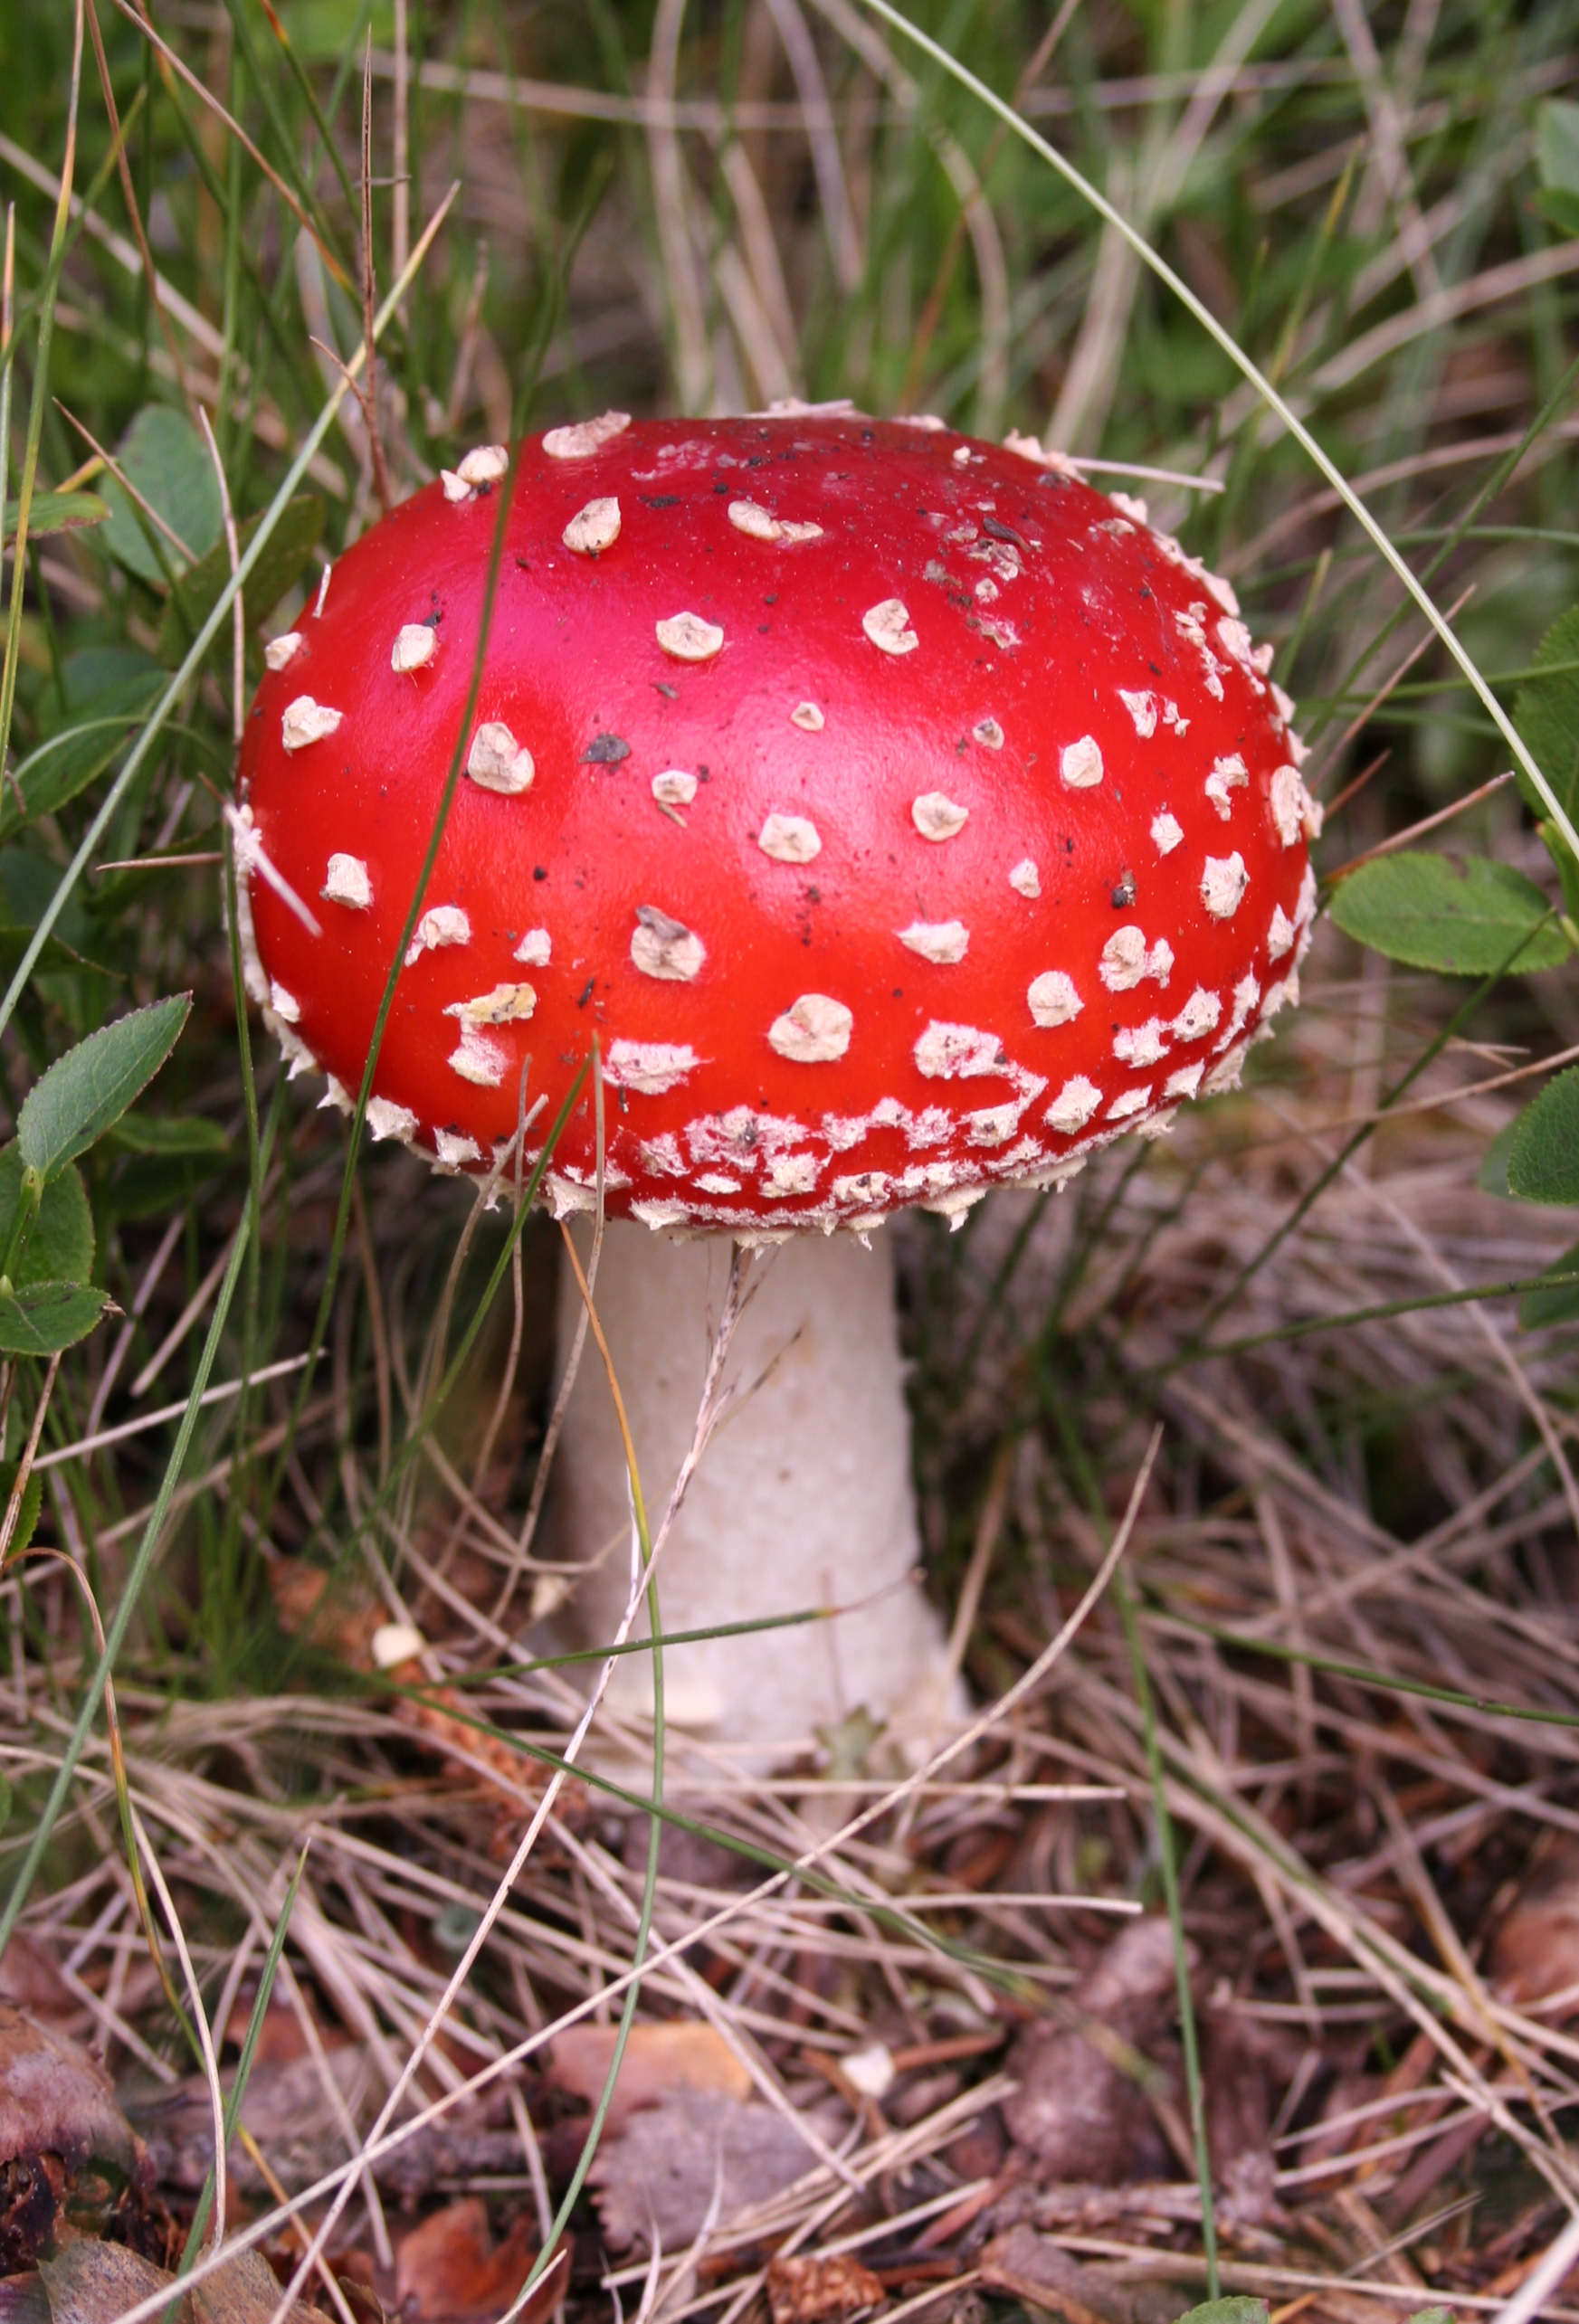 Fly agaric (Amanita muscaria) is one of the natural products toxic to the liver